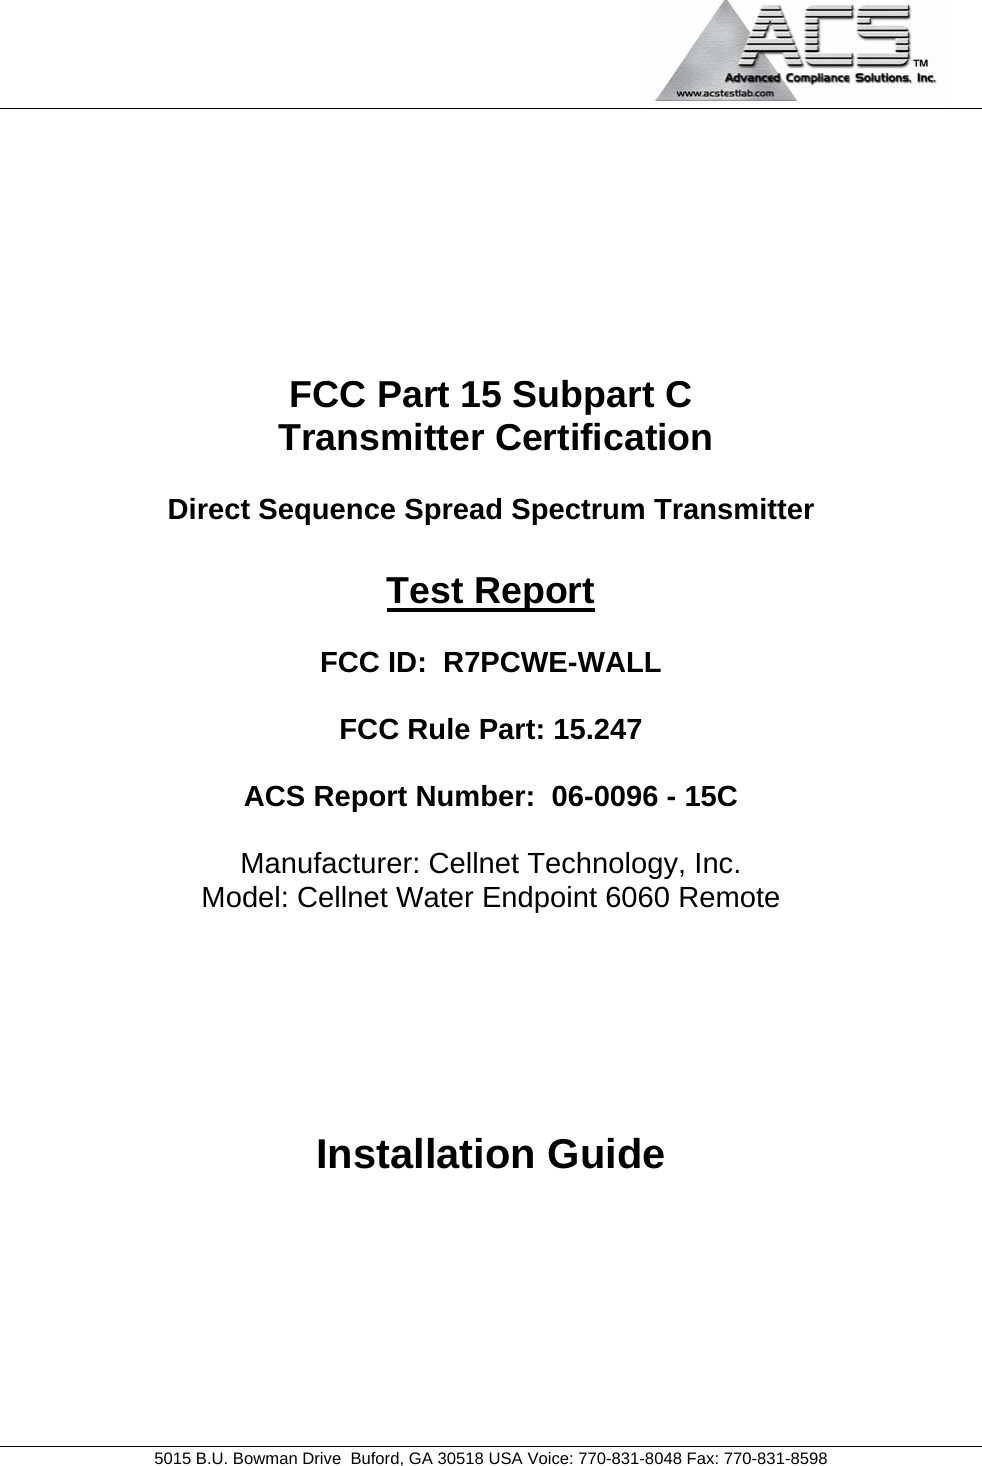                                             5015 B.U. Bowman Drive  Buford, GA 30518 USA Voice: 770-831-8048 Fax: 770-831-8598   FCC Part 15 Subpart C  Transmitter Certification  Direct Sequence Spread Spectrum Transmitter  Test Report  FCC ID:  R7PCWE-WALL  FCC Rule Part: 15.247  ACS Report Number:  06-0096 - 15C   Manufacturer: Cellnet Technology, Inc. Model: Cellnet Water Endpoint 6060 Remote       Installation Guide 